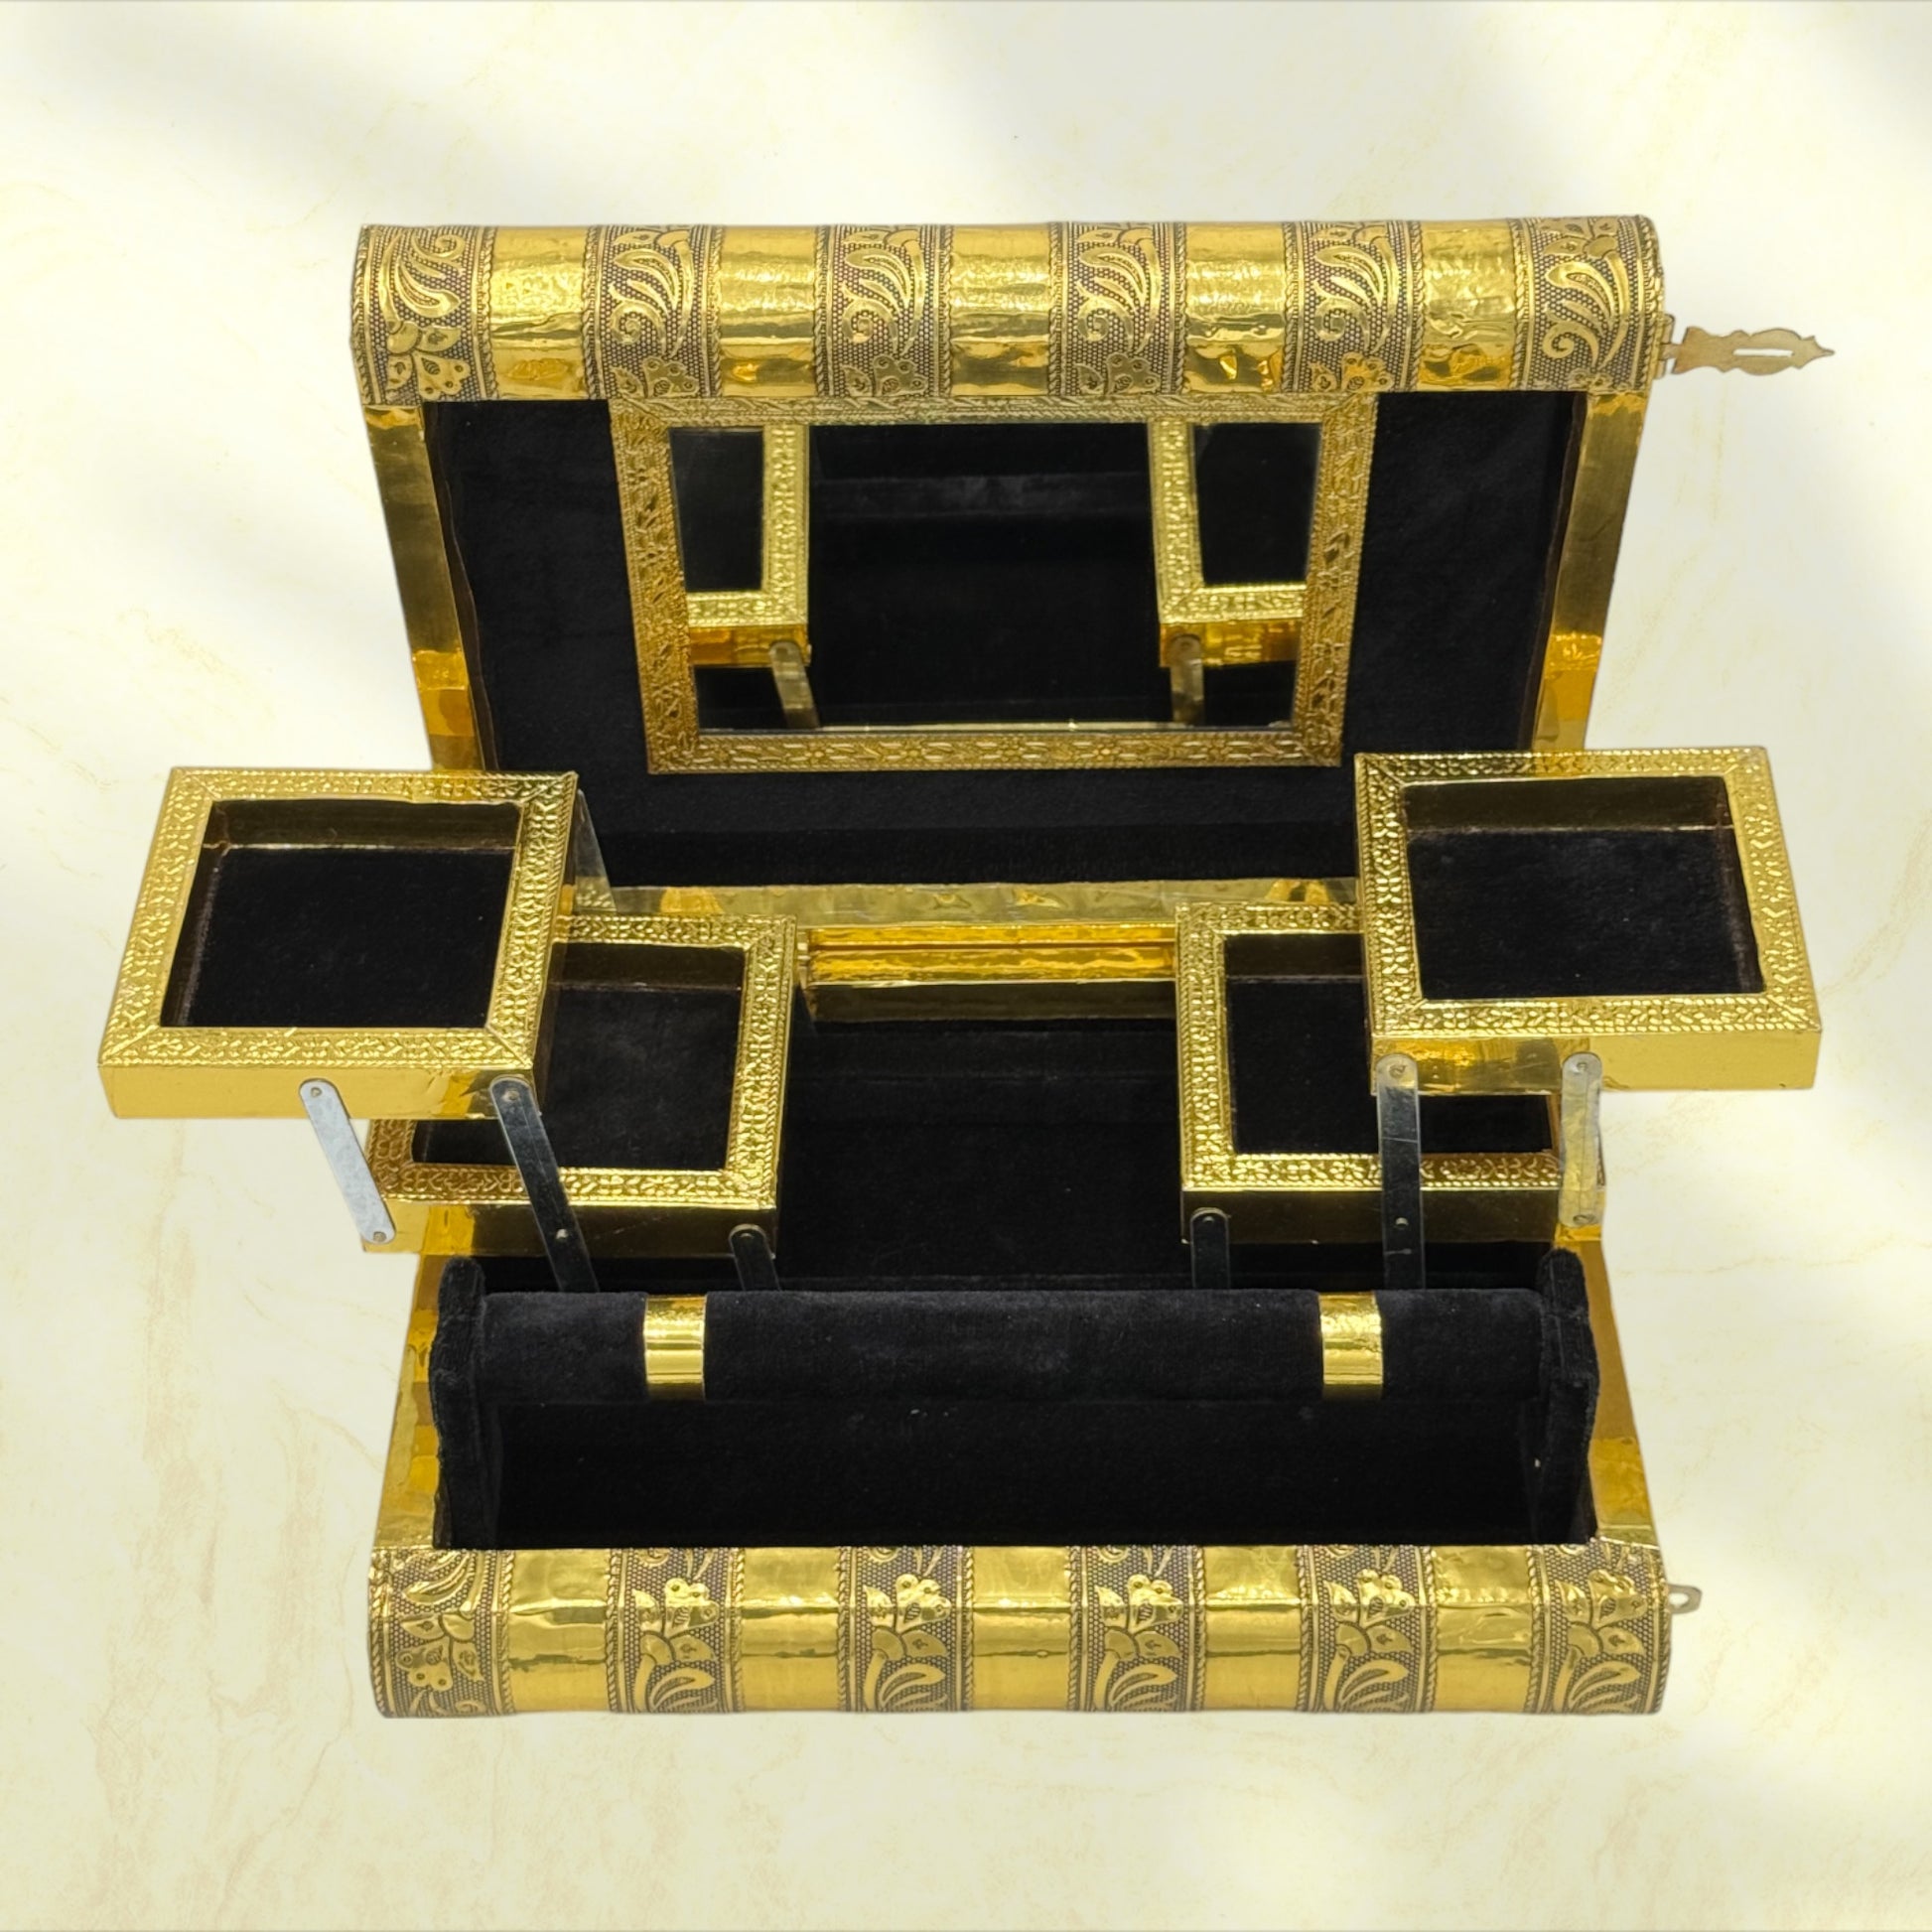 Majestic Indian Tiger Handmade Jewelry Holder Box - Tortuna shows black box open with trays extended